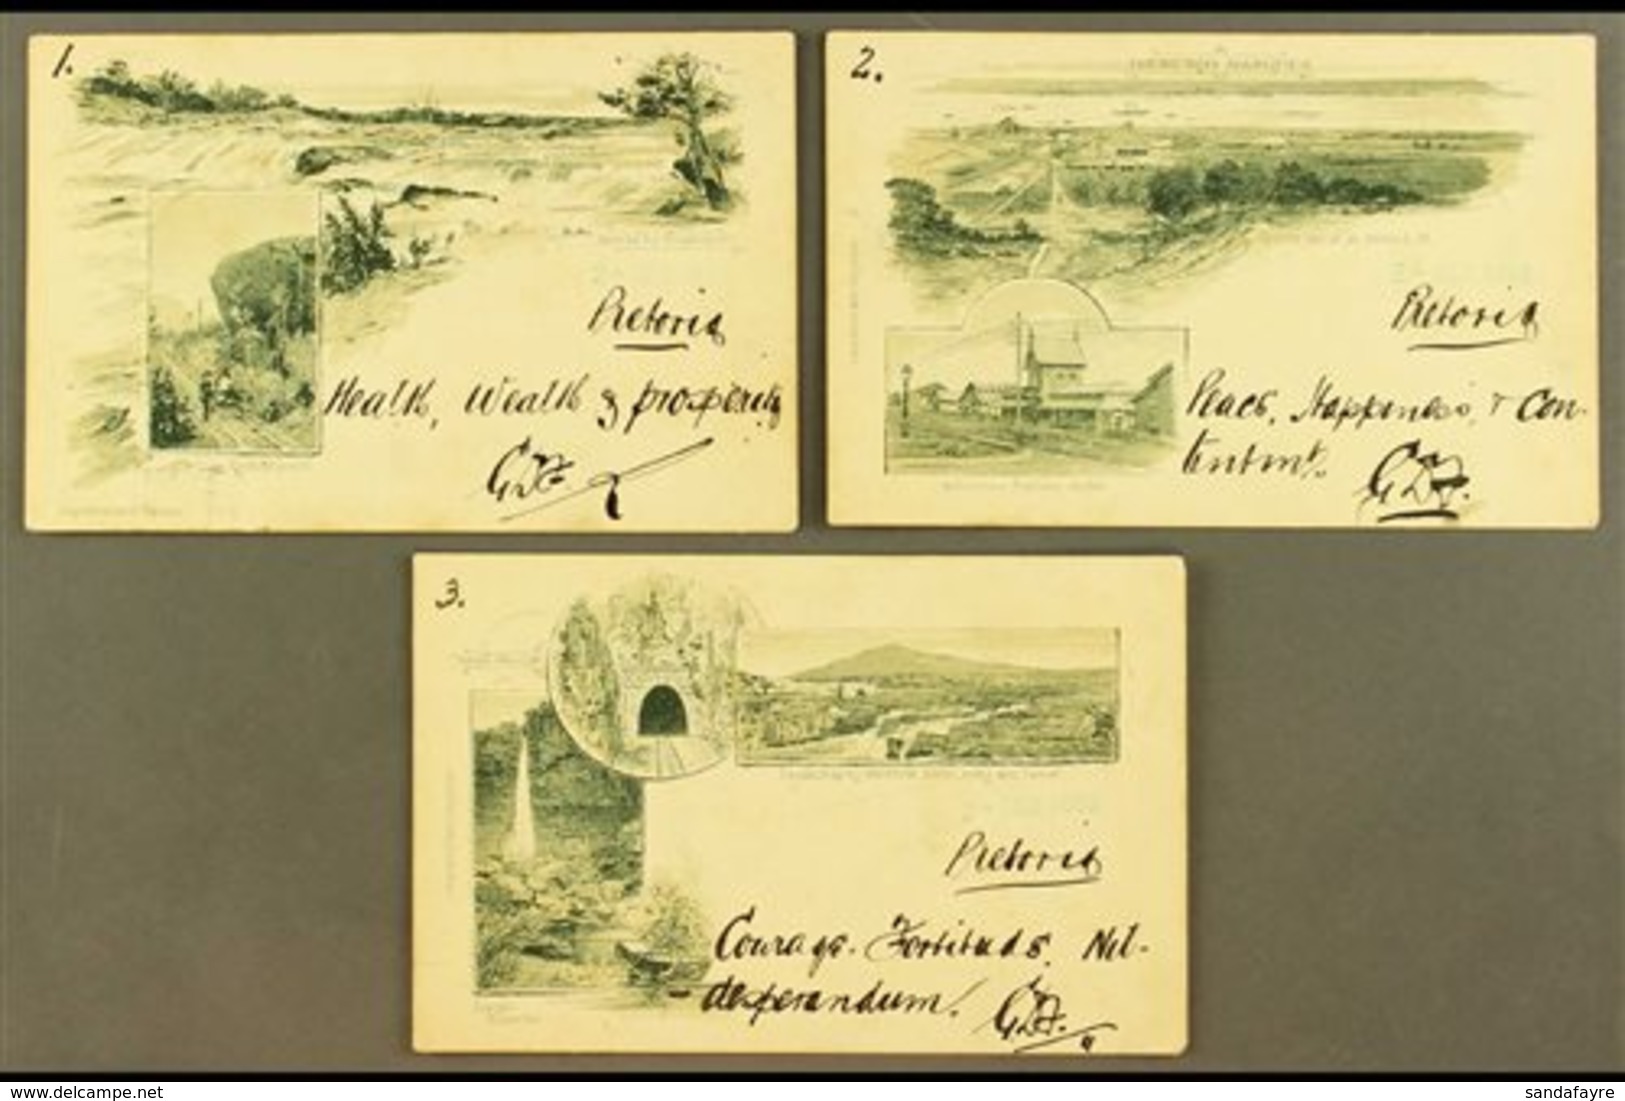 TRANSVAAL 1902 Group Of Three Different Pictorial Postcards, Each Numbered And Addressed To Pretoria, Each Posted Withou - Sin Clasificación